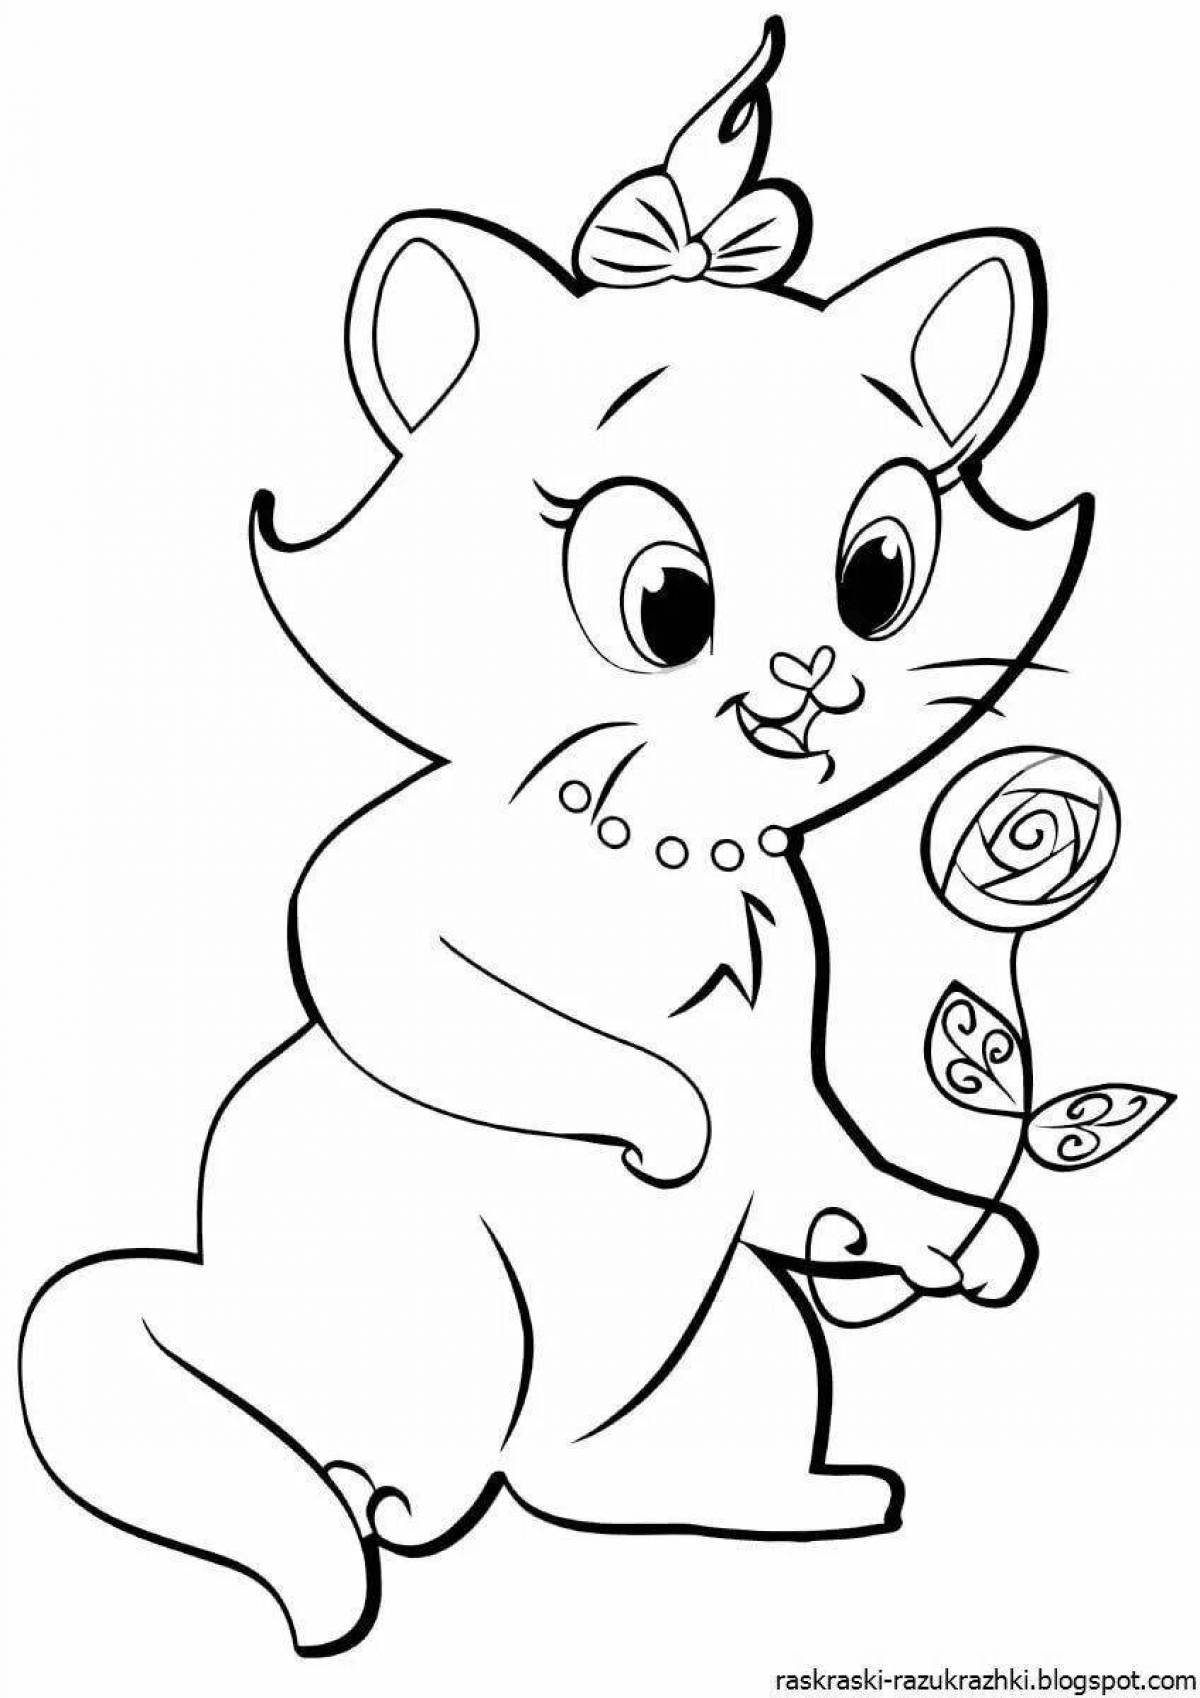 Glowing kitty coloring book for kids